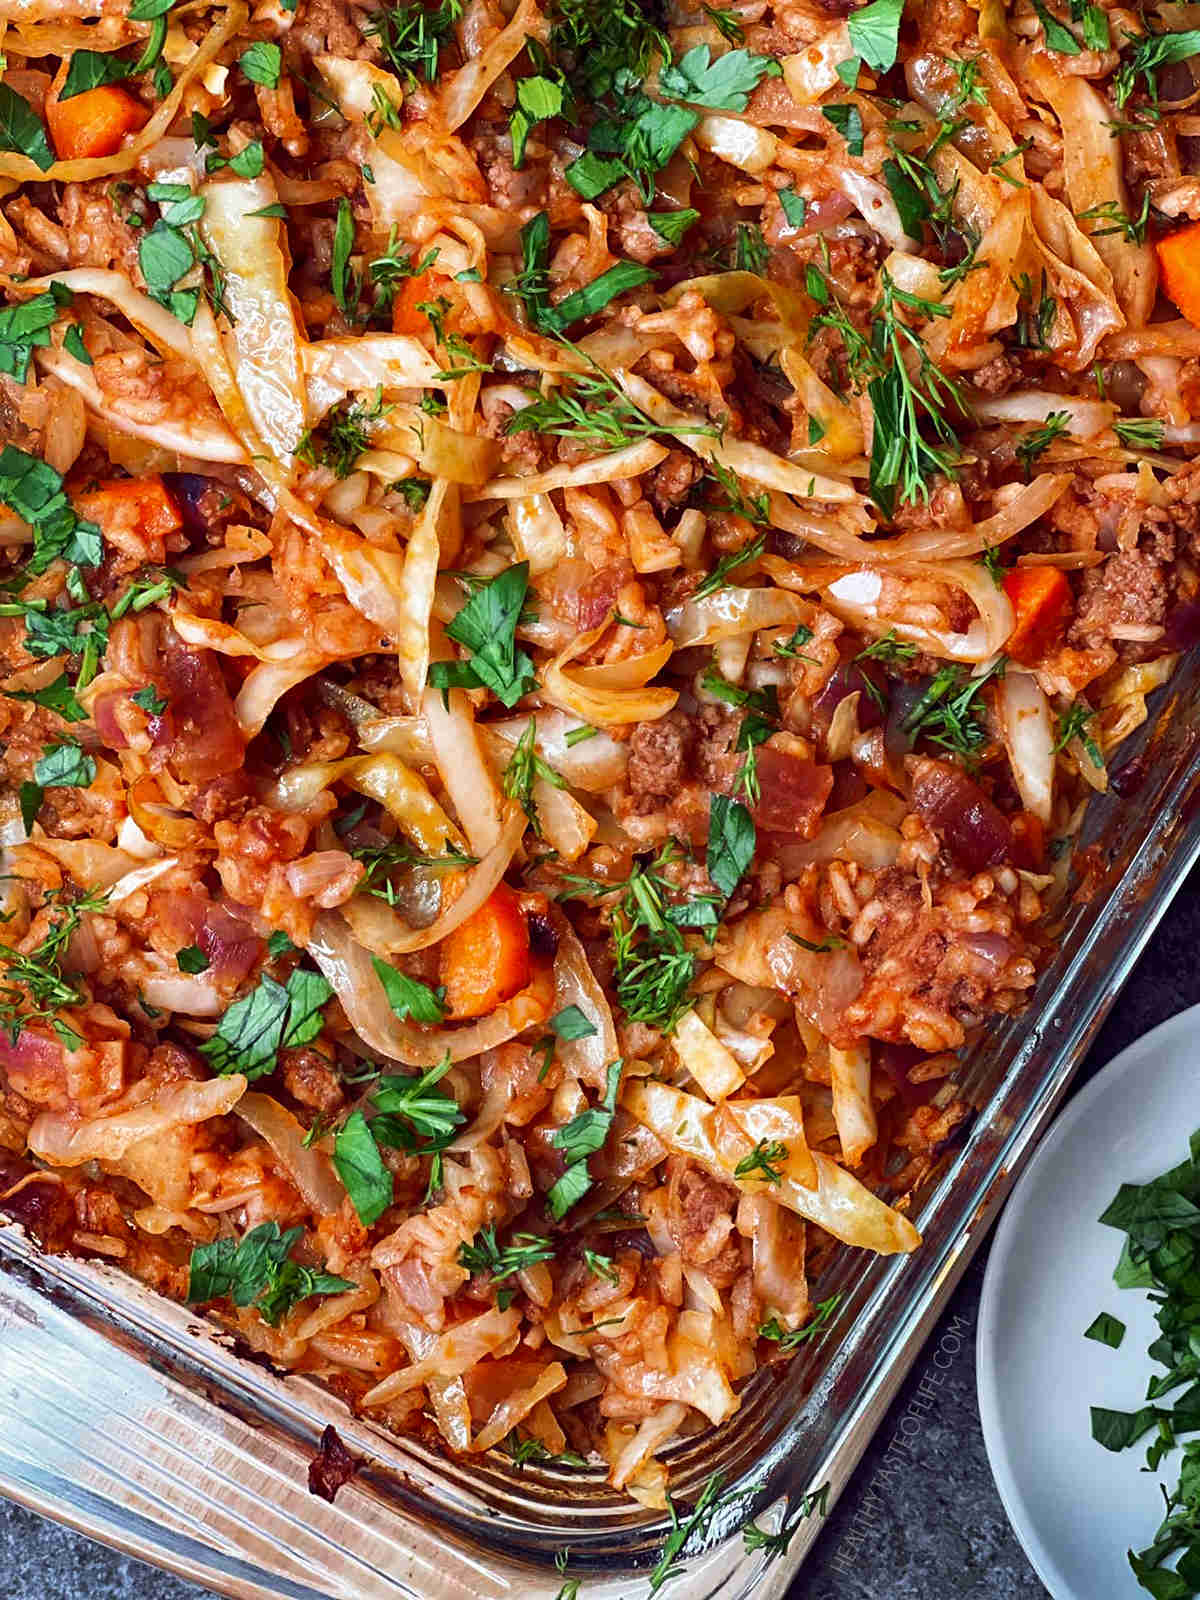 Lazy man cabbage roll casserole baked in the oven - unstuffed cabbage rolls recipe.